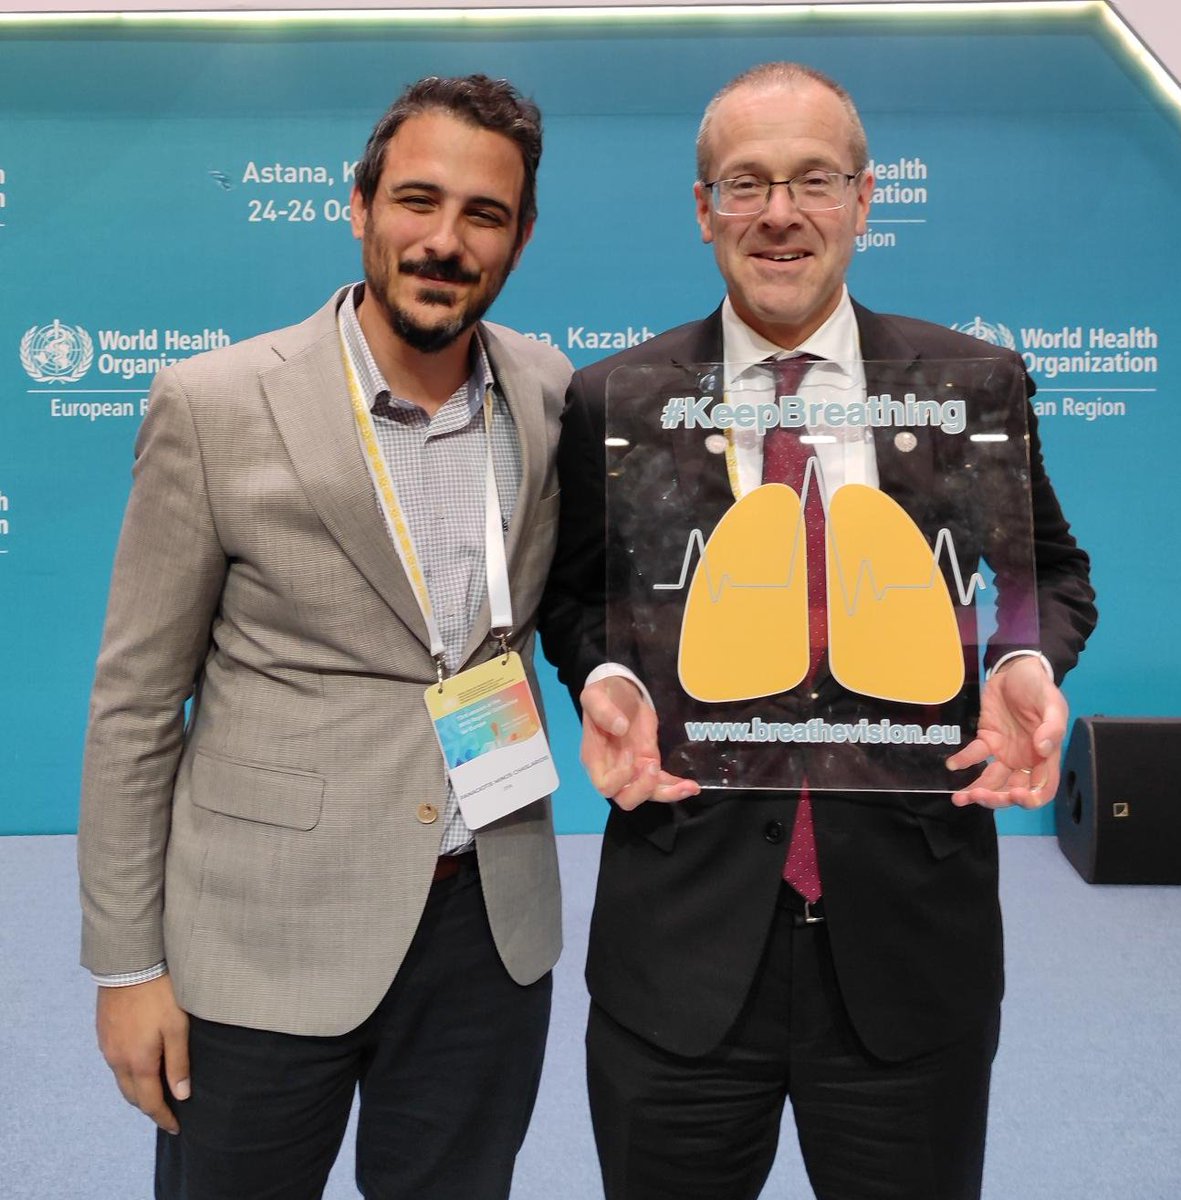 Thanks for your support to #LungHealth, dear @hans_kluge!

Looking forward to working  with you to #KeepBreathing.

#RespiratoryDisease is the 3rd cause of the death in the EU, affecting patients, economies and societies.

We need action now: bit.ly/499l7HN

#RC73Astana